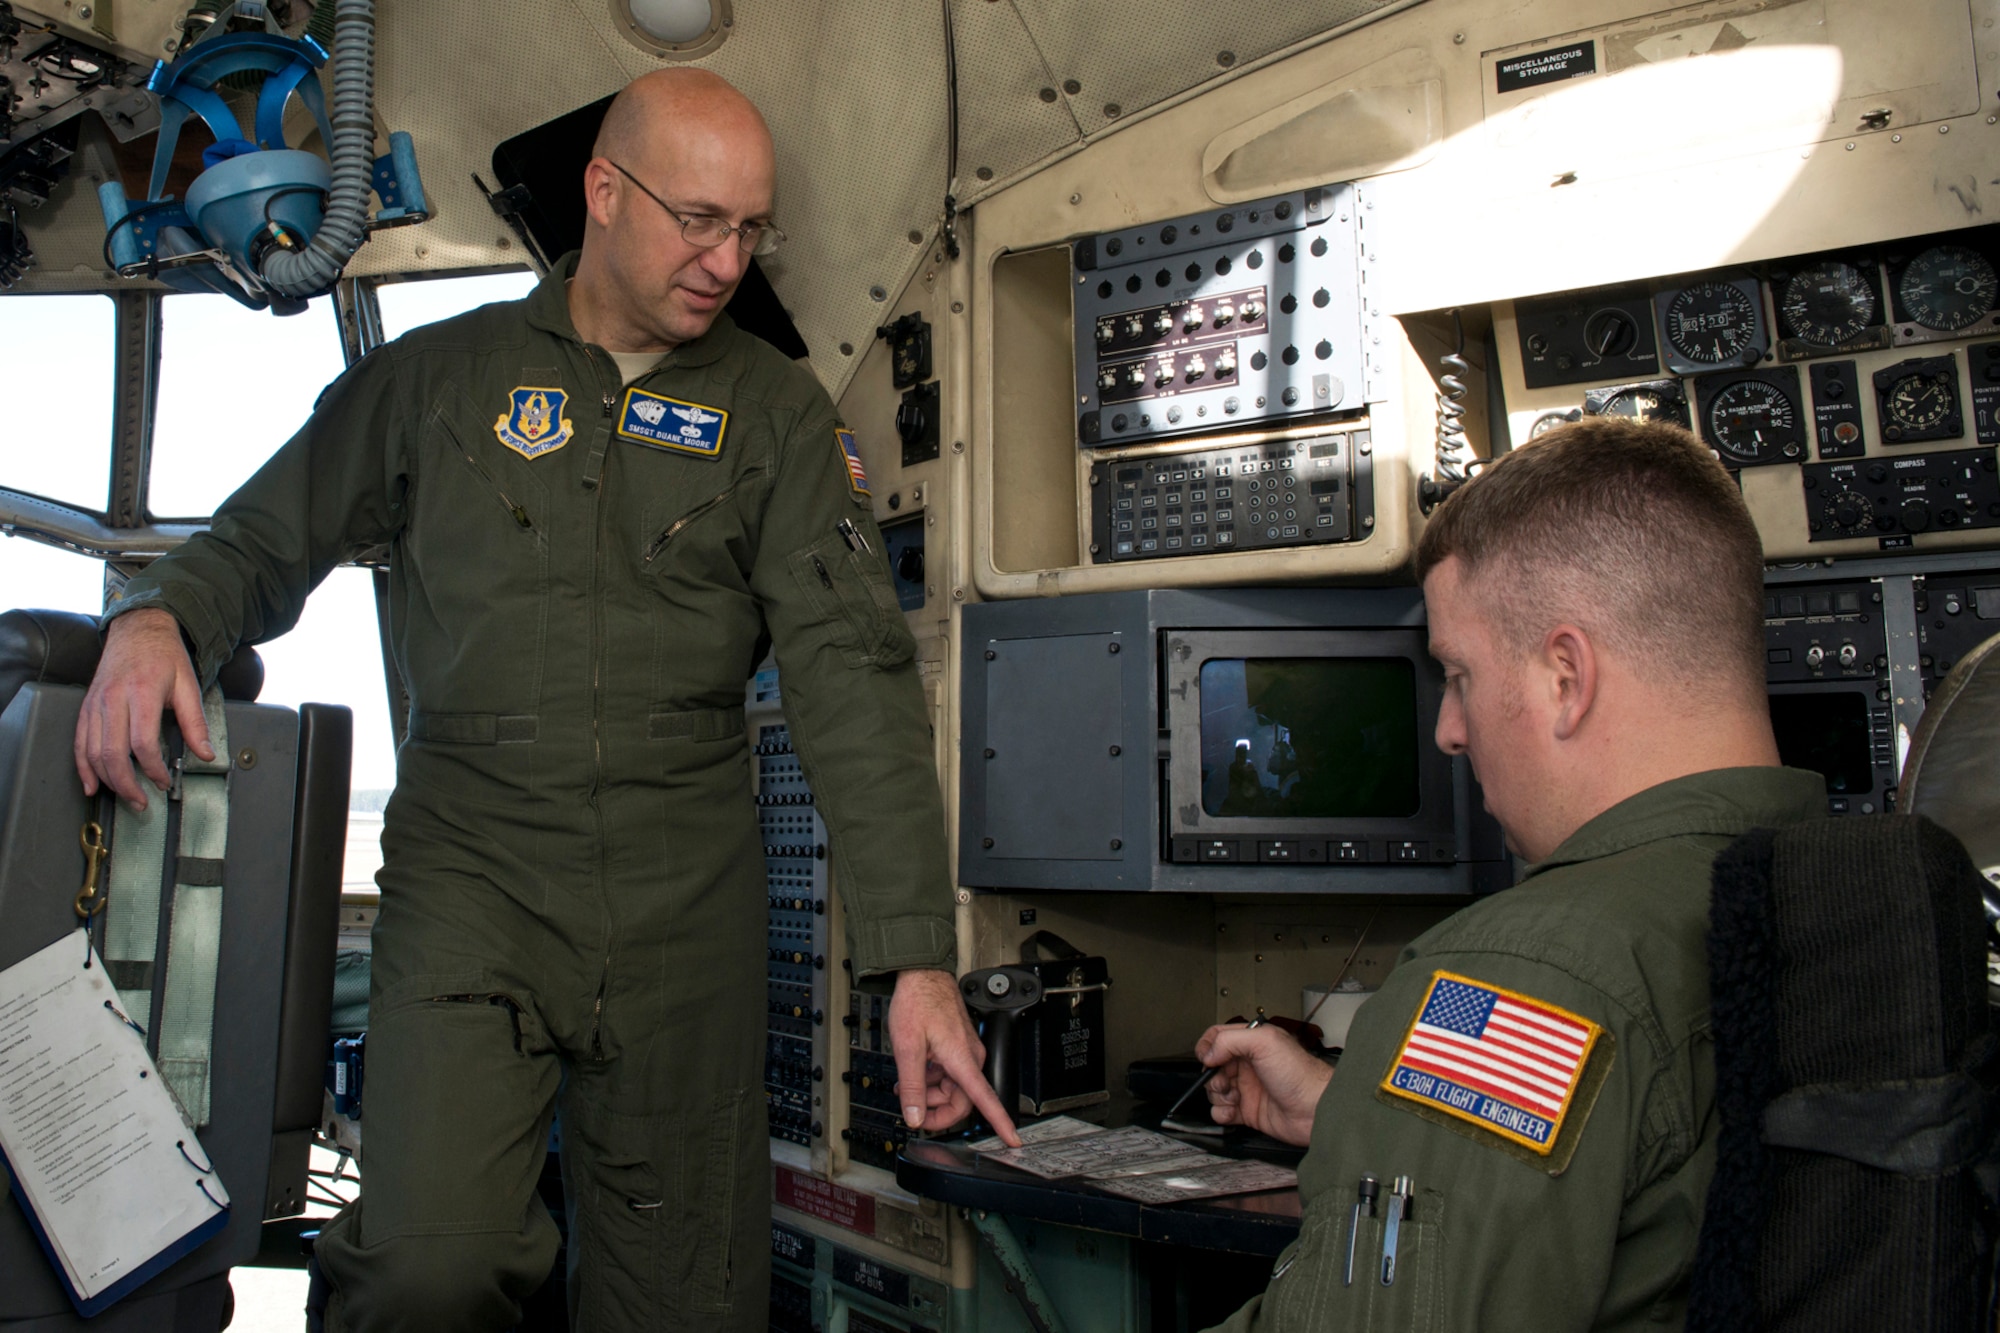 U.S. Air Force Reserve Senior Master Sgt. Duane Moore and Master Sgt. Dave Hemphill, discuss takeoff and landing data prior to the last training mission flight of a C-130H assigned to the 913th Airlift Group at Little Rock Air Force Base, Ark., Jan. 28, 2016. The final two-hour mission consisted of low level air drop techniques and pilot proficiency training. Both Airmen are flight engineers assigned to the 327th Airlift Squadron at Little Rock AFB. (U.S. Air Force photo by Master Sgt. Jeff Walston/Released)